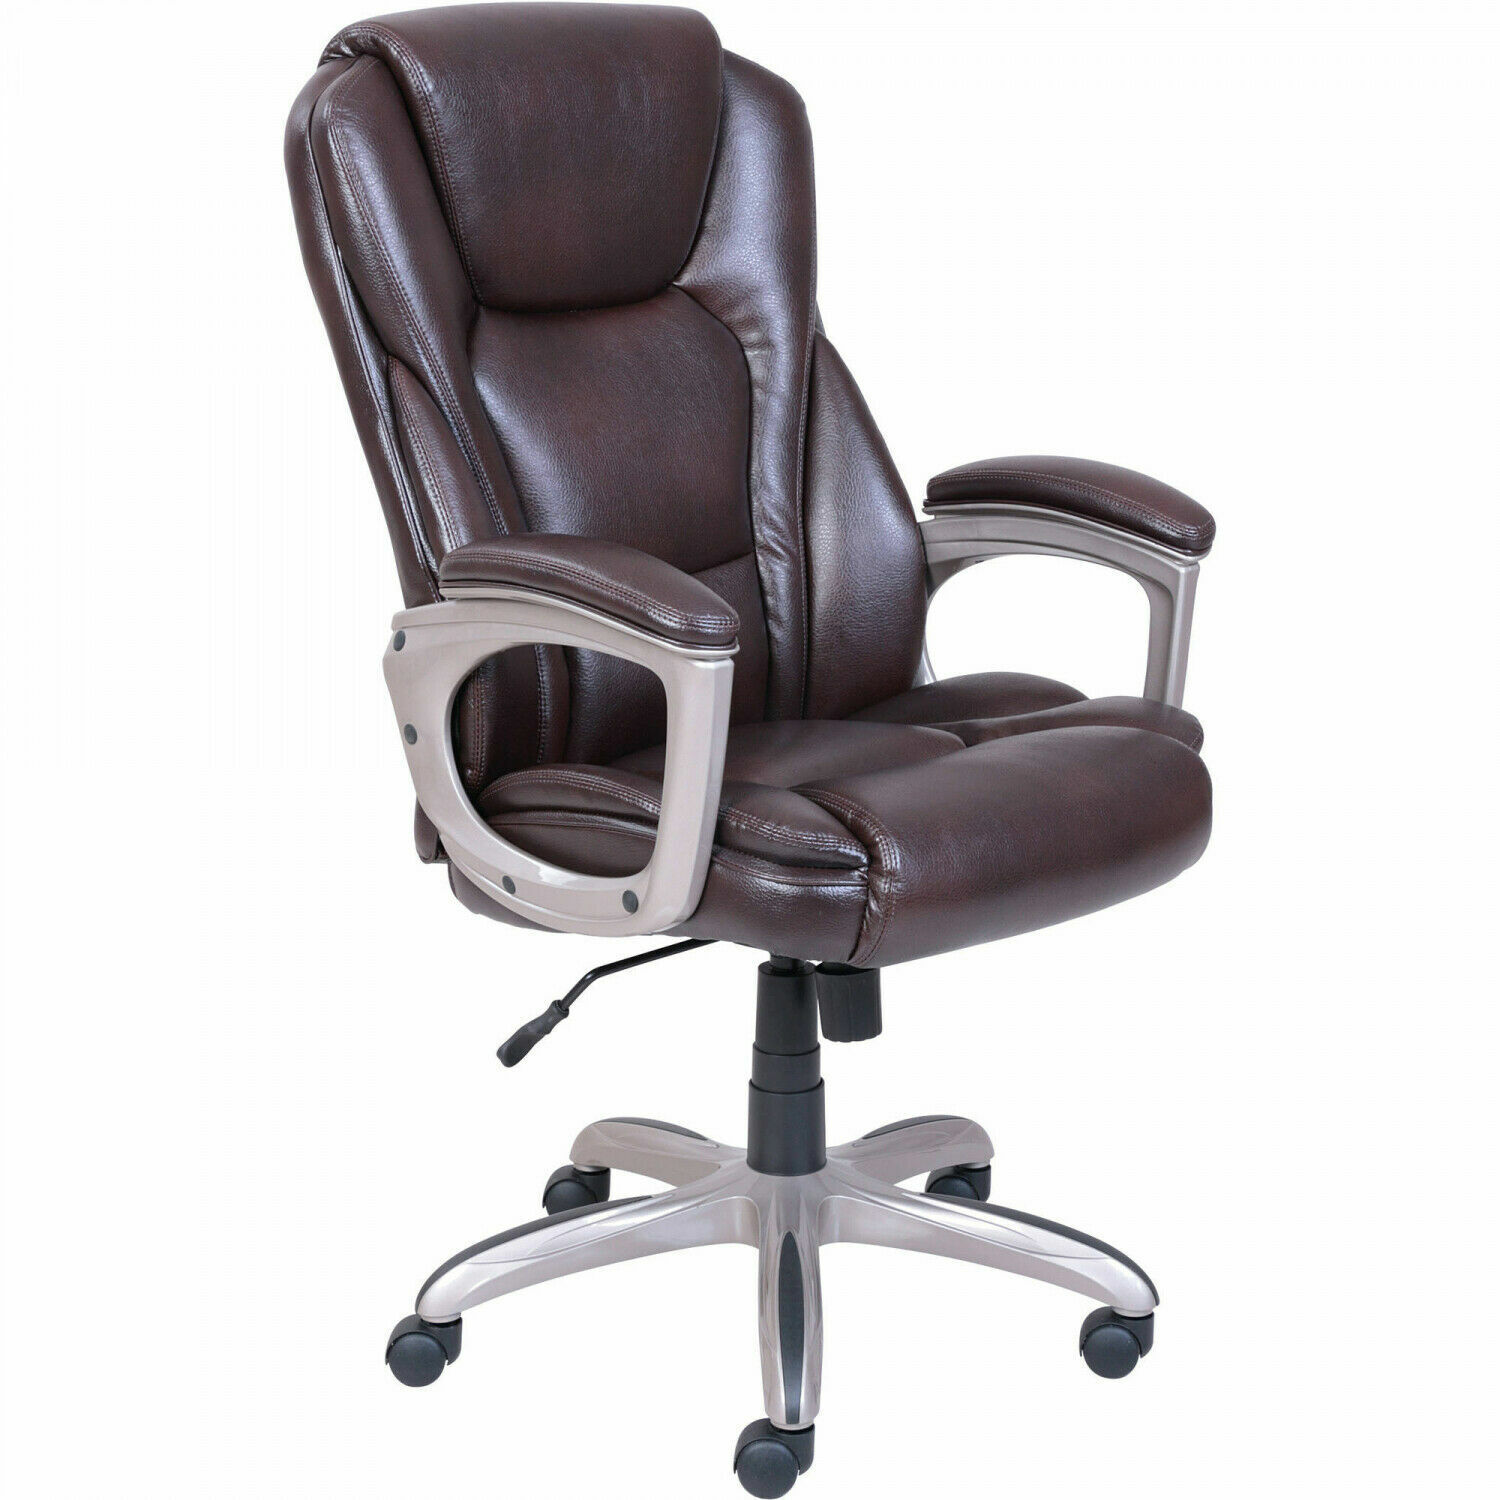 Serta Big and Tall Commercial Office Chair With Memory Foam BROWN UP TO 350LBS